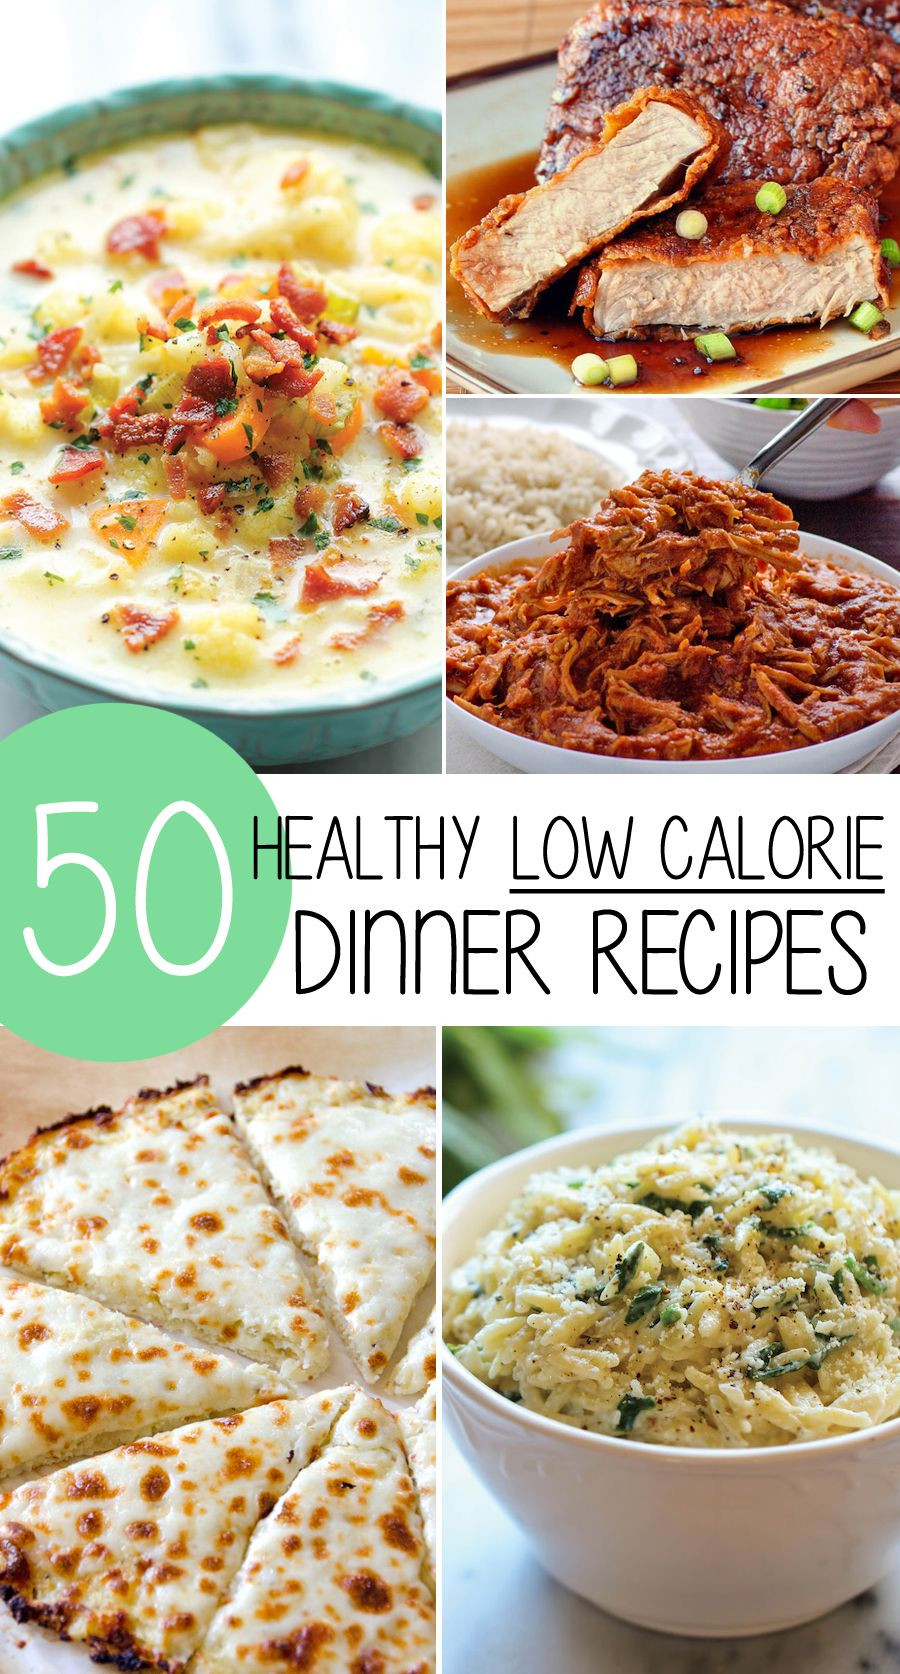 Low Calorie Dinners For 2
 50 Healthy Low Calorie Weight Loss Dinner Recipes